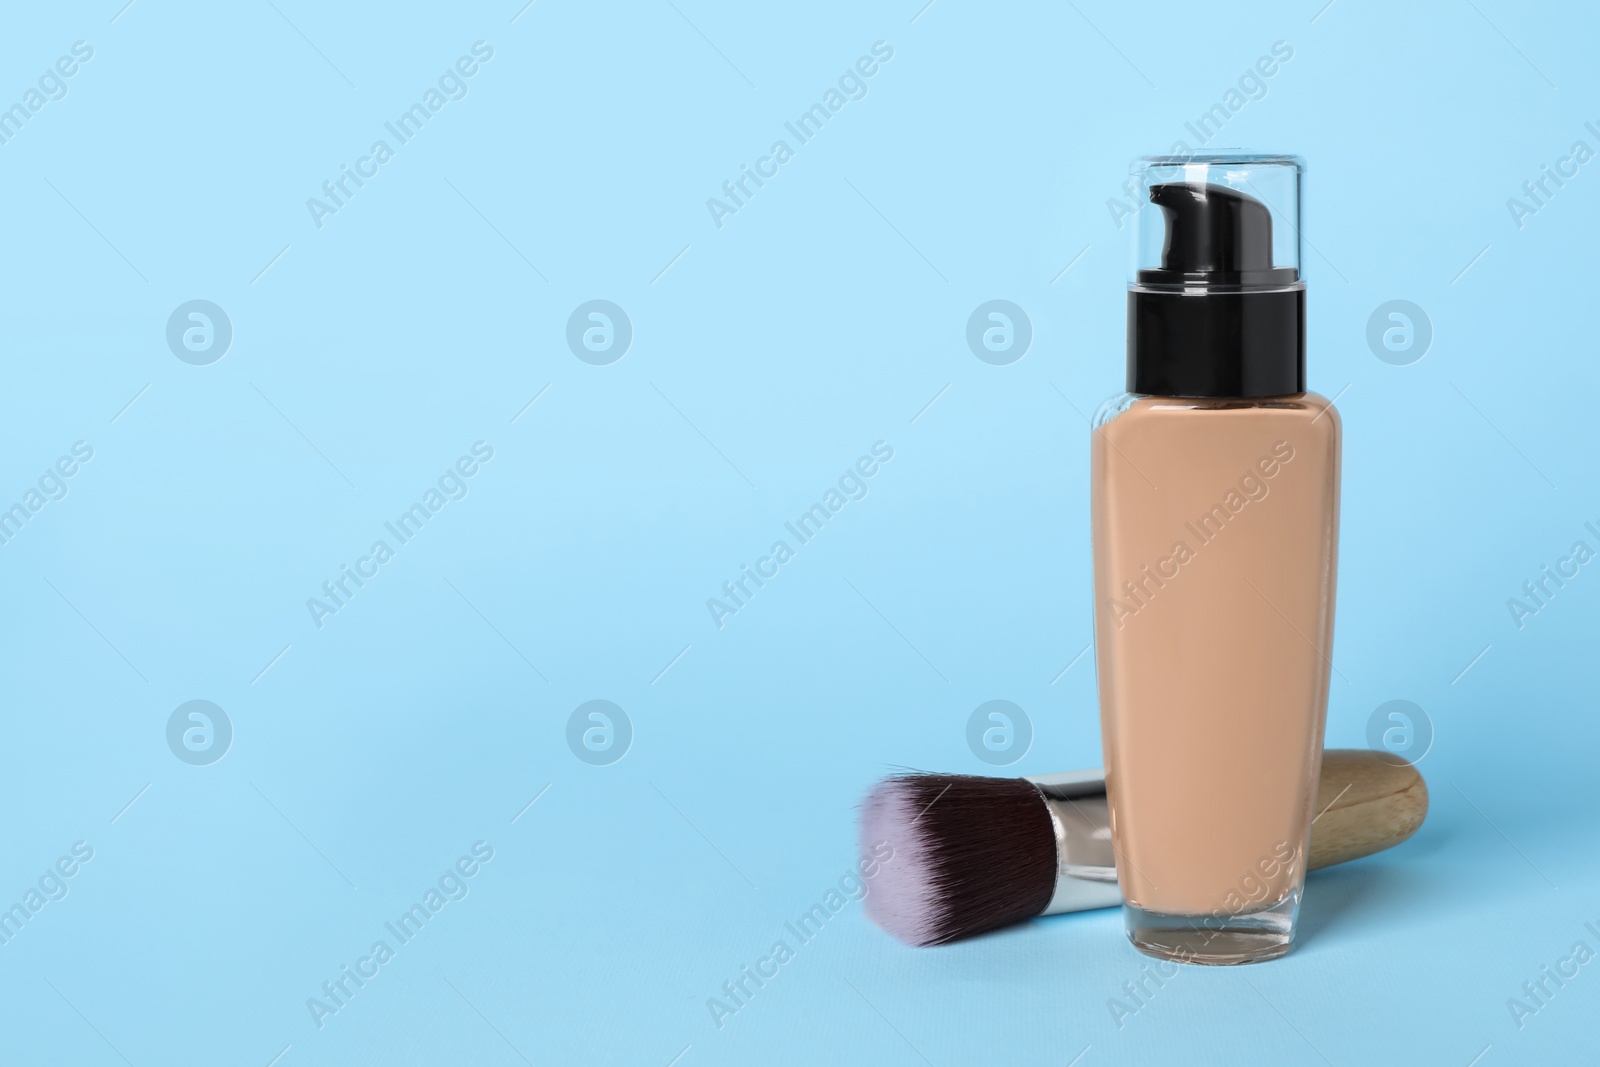 Photo of Bottle of skin foundation and brush on light blue background, space for text. Makeup product